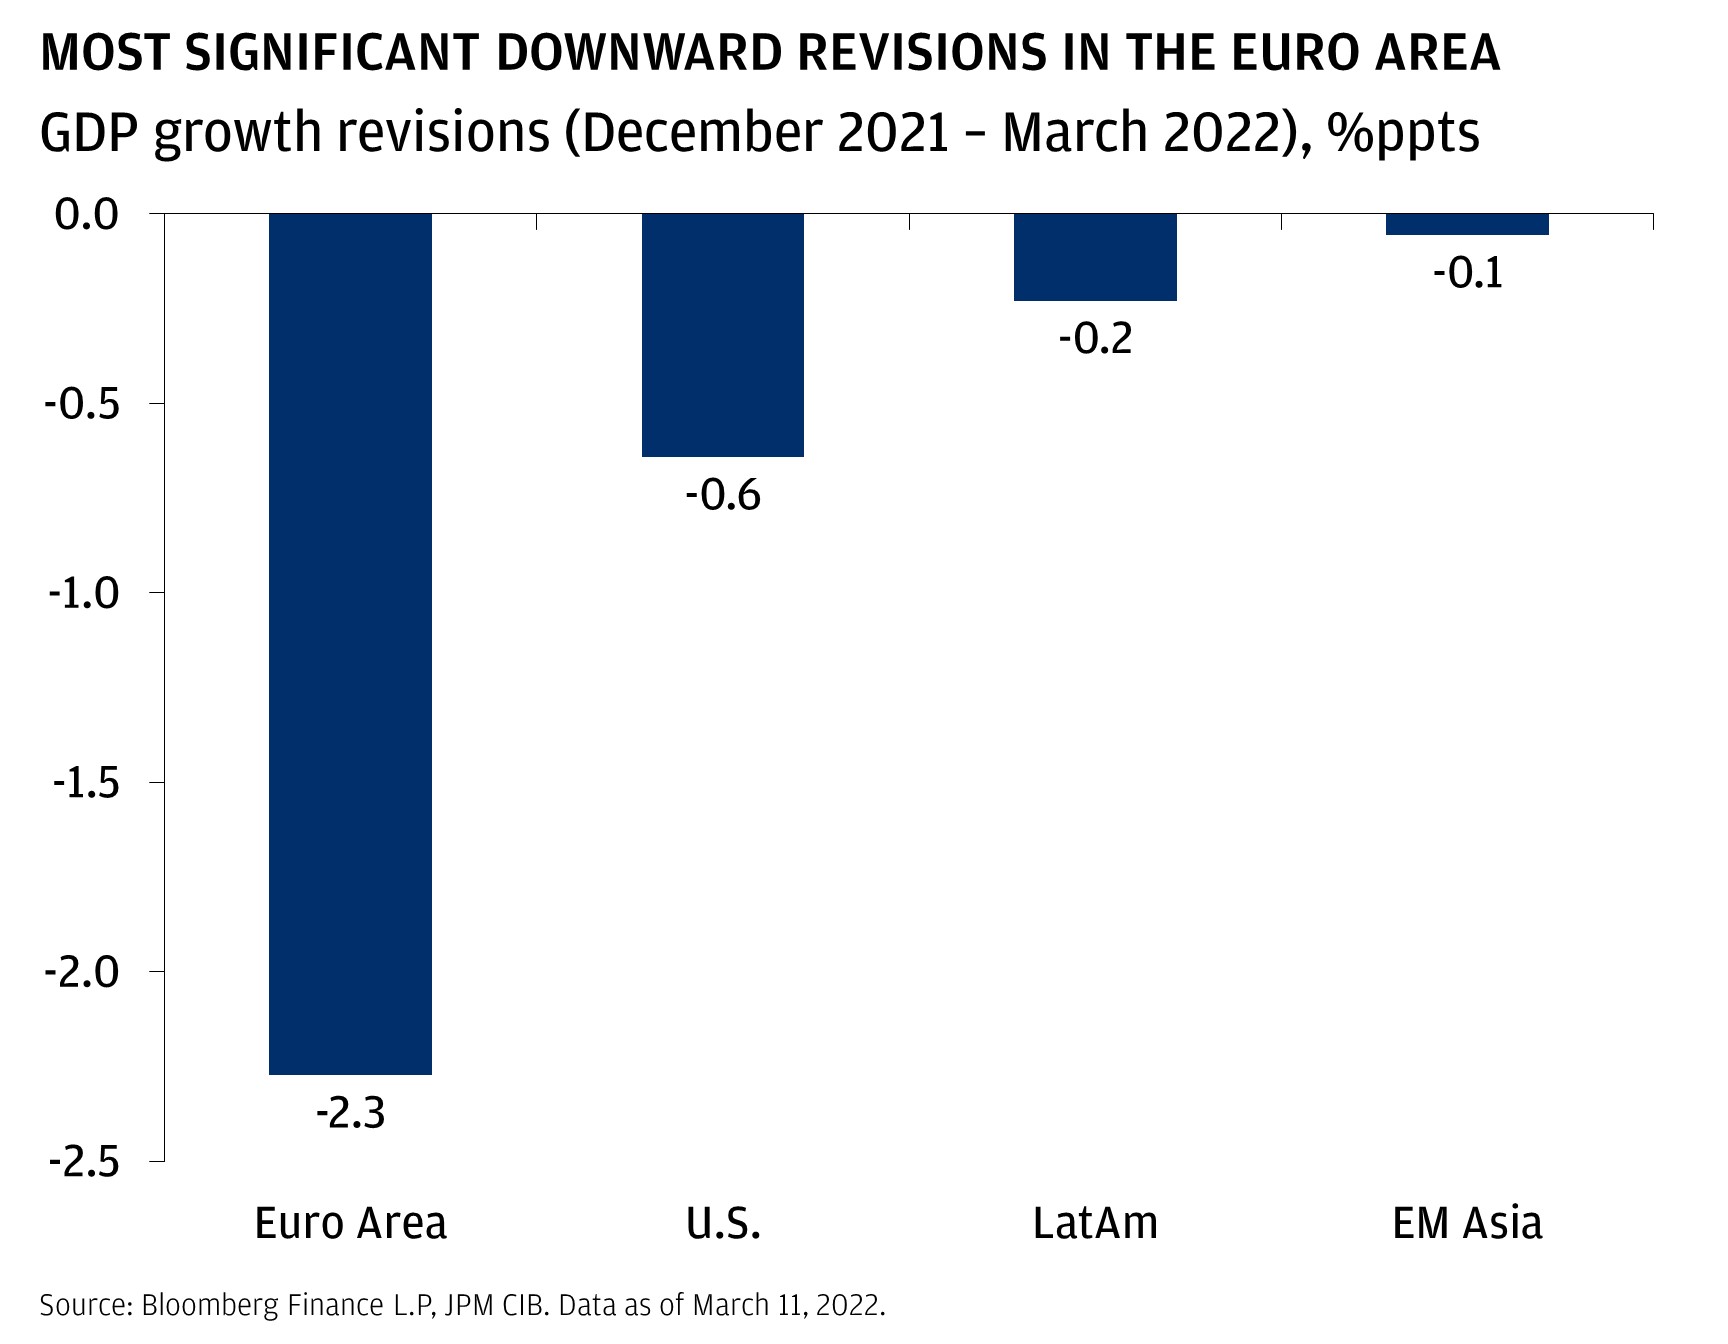 This chart shows the downward GDP revisions from December 2021 to March 2022 (% ppts) in four regions. THE MOST SIGNIFICANT DOWNWARD REVISIONS IN THE EURO AREA